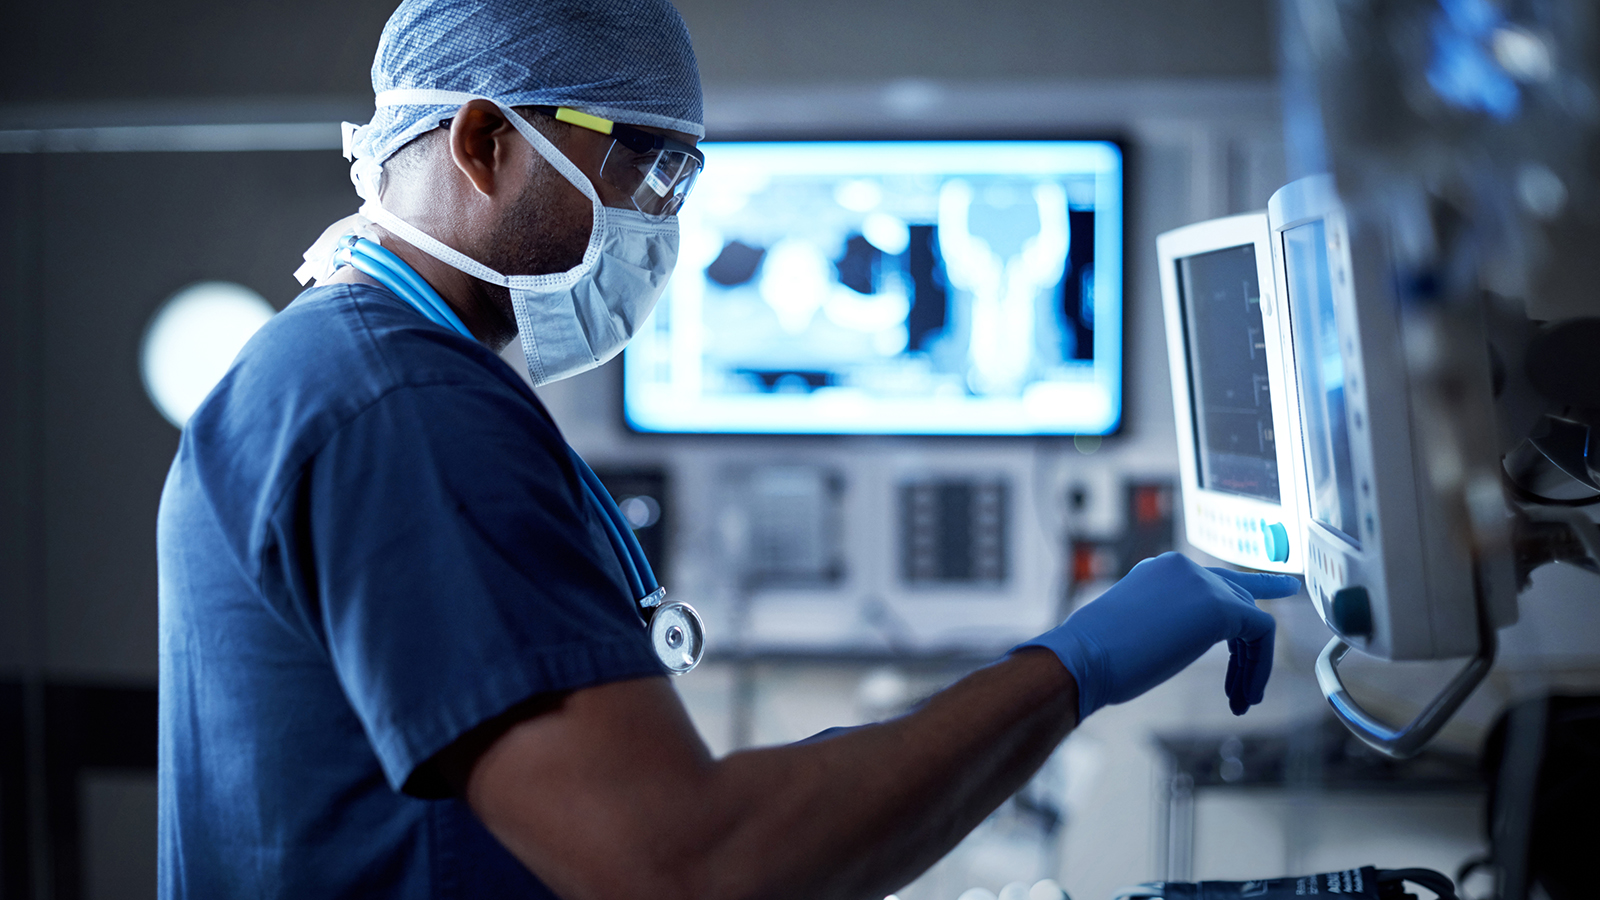 U.S. Medical Center Improves Healthcare Delivery With NETSCOUT